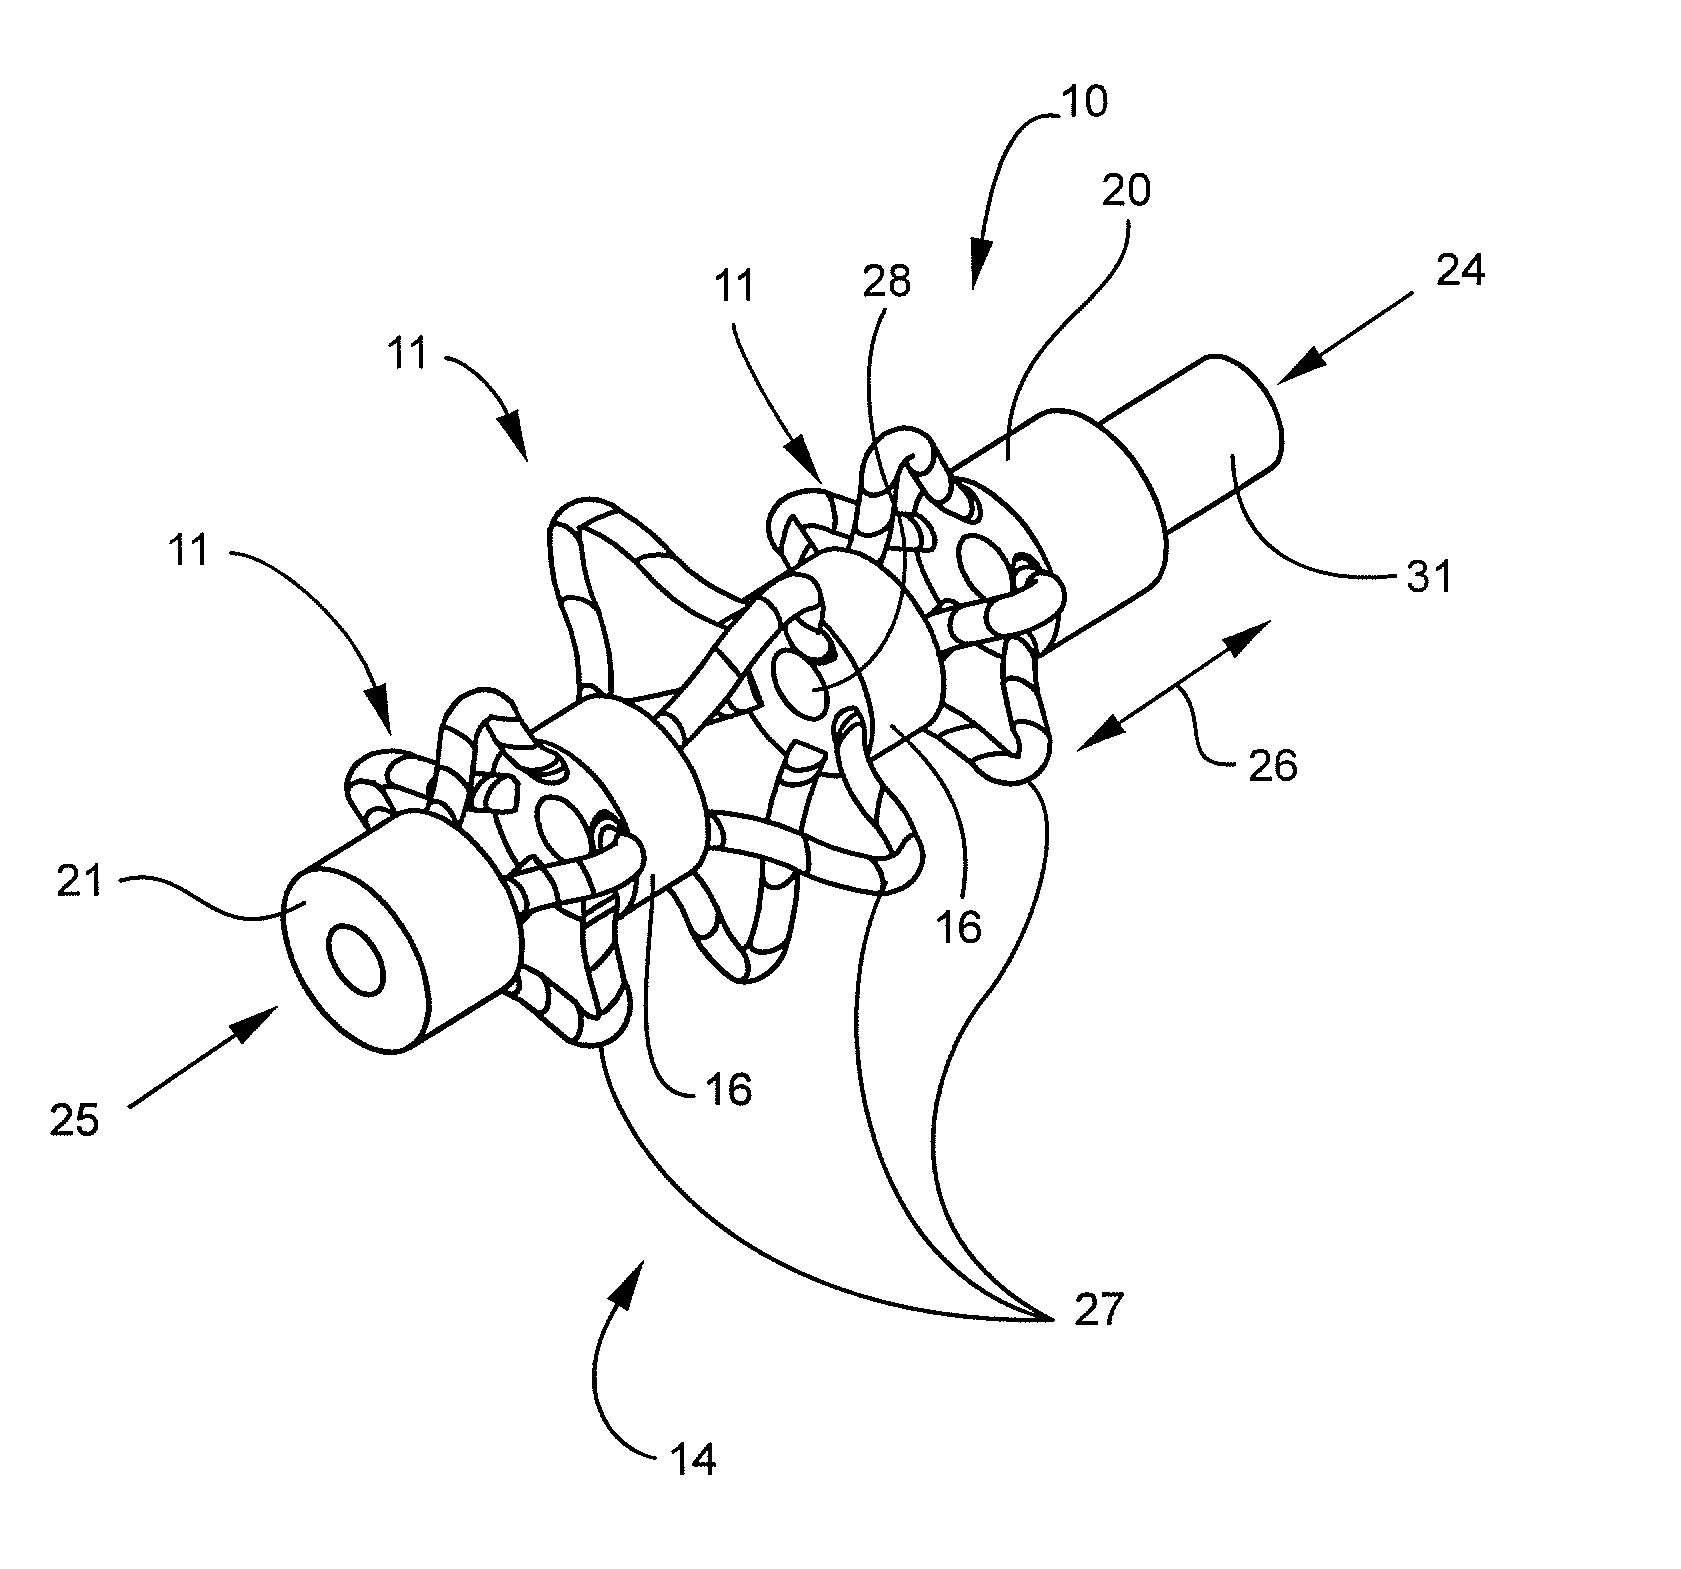 Bone fusion device and methods